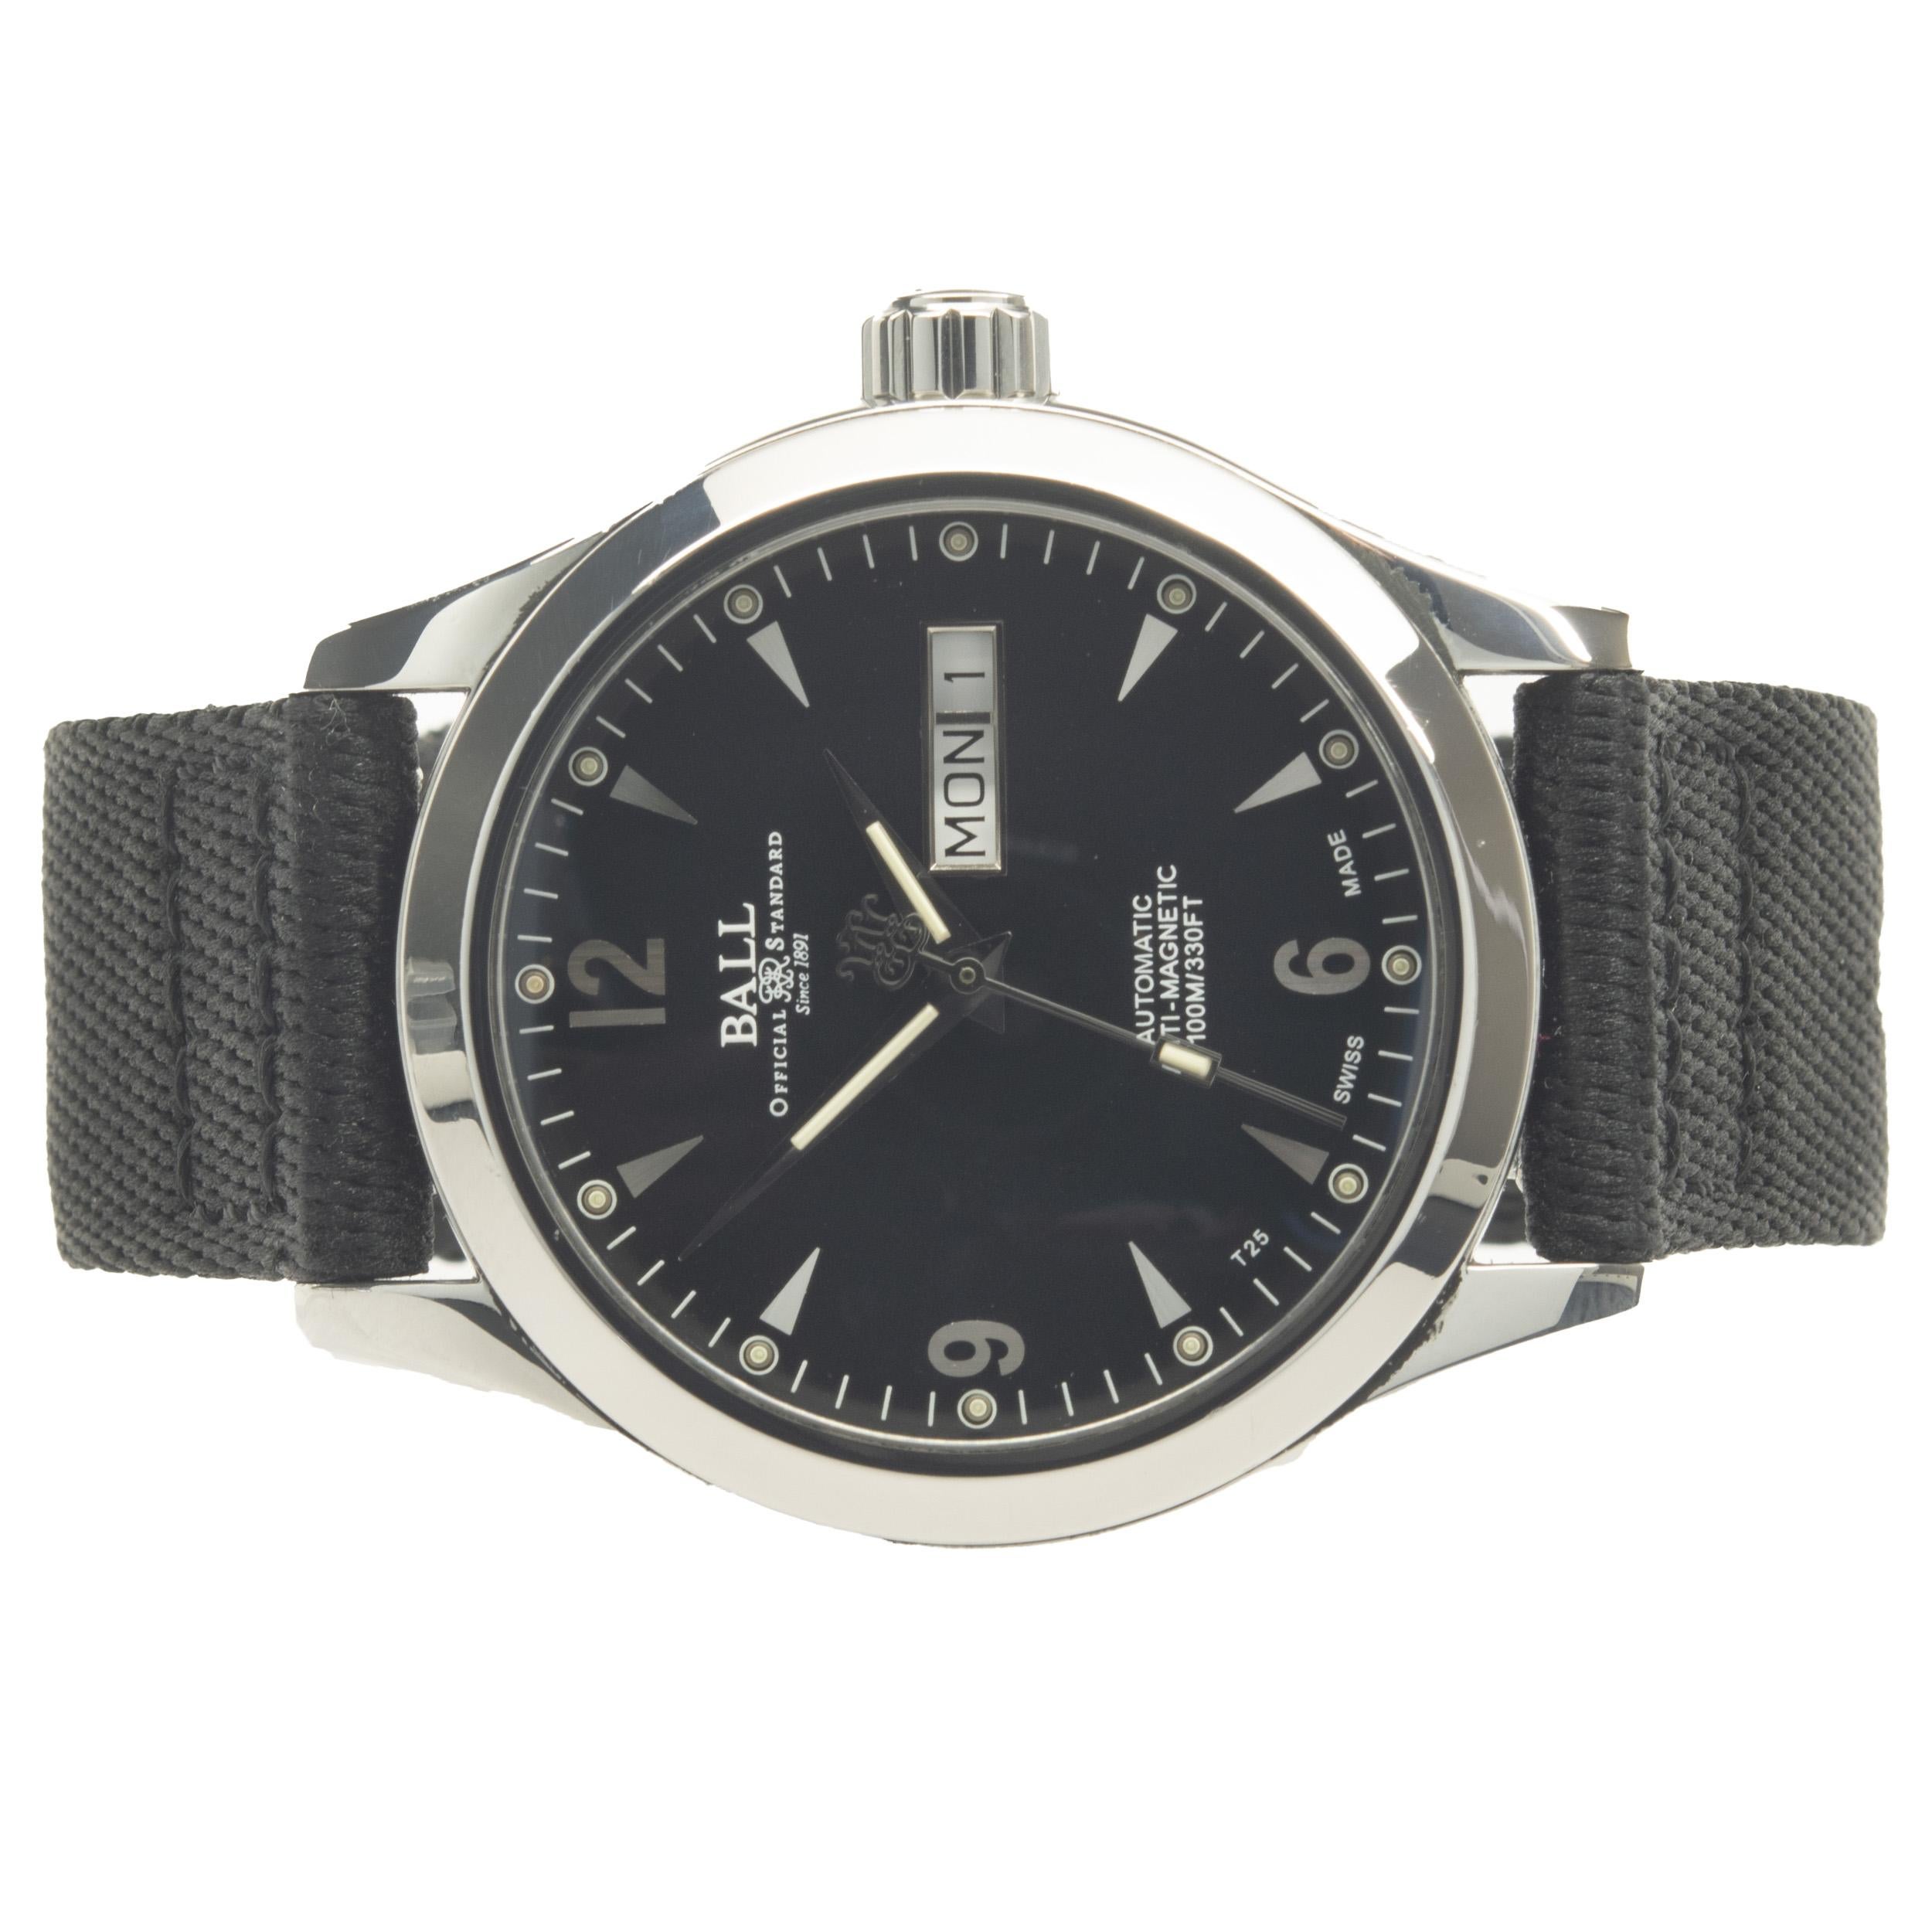 Movement: automatic 
Function:  hours, minutes, seconds, day, date
Case: 40mm round stainless steel, anti-reflective sapphire crystal, screw-down crown
Dial: black stick / arabic, day-date at 3 o’clock
Reference: NM1020C

No box or papers